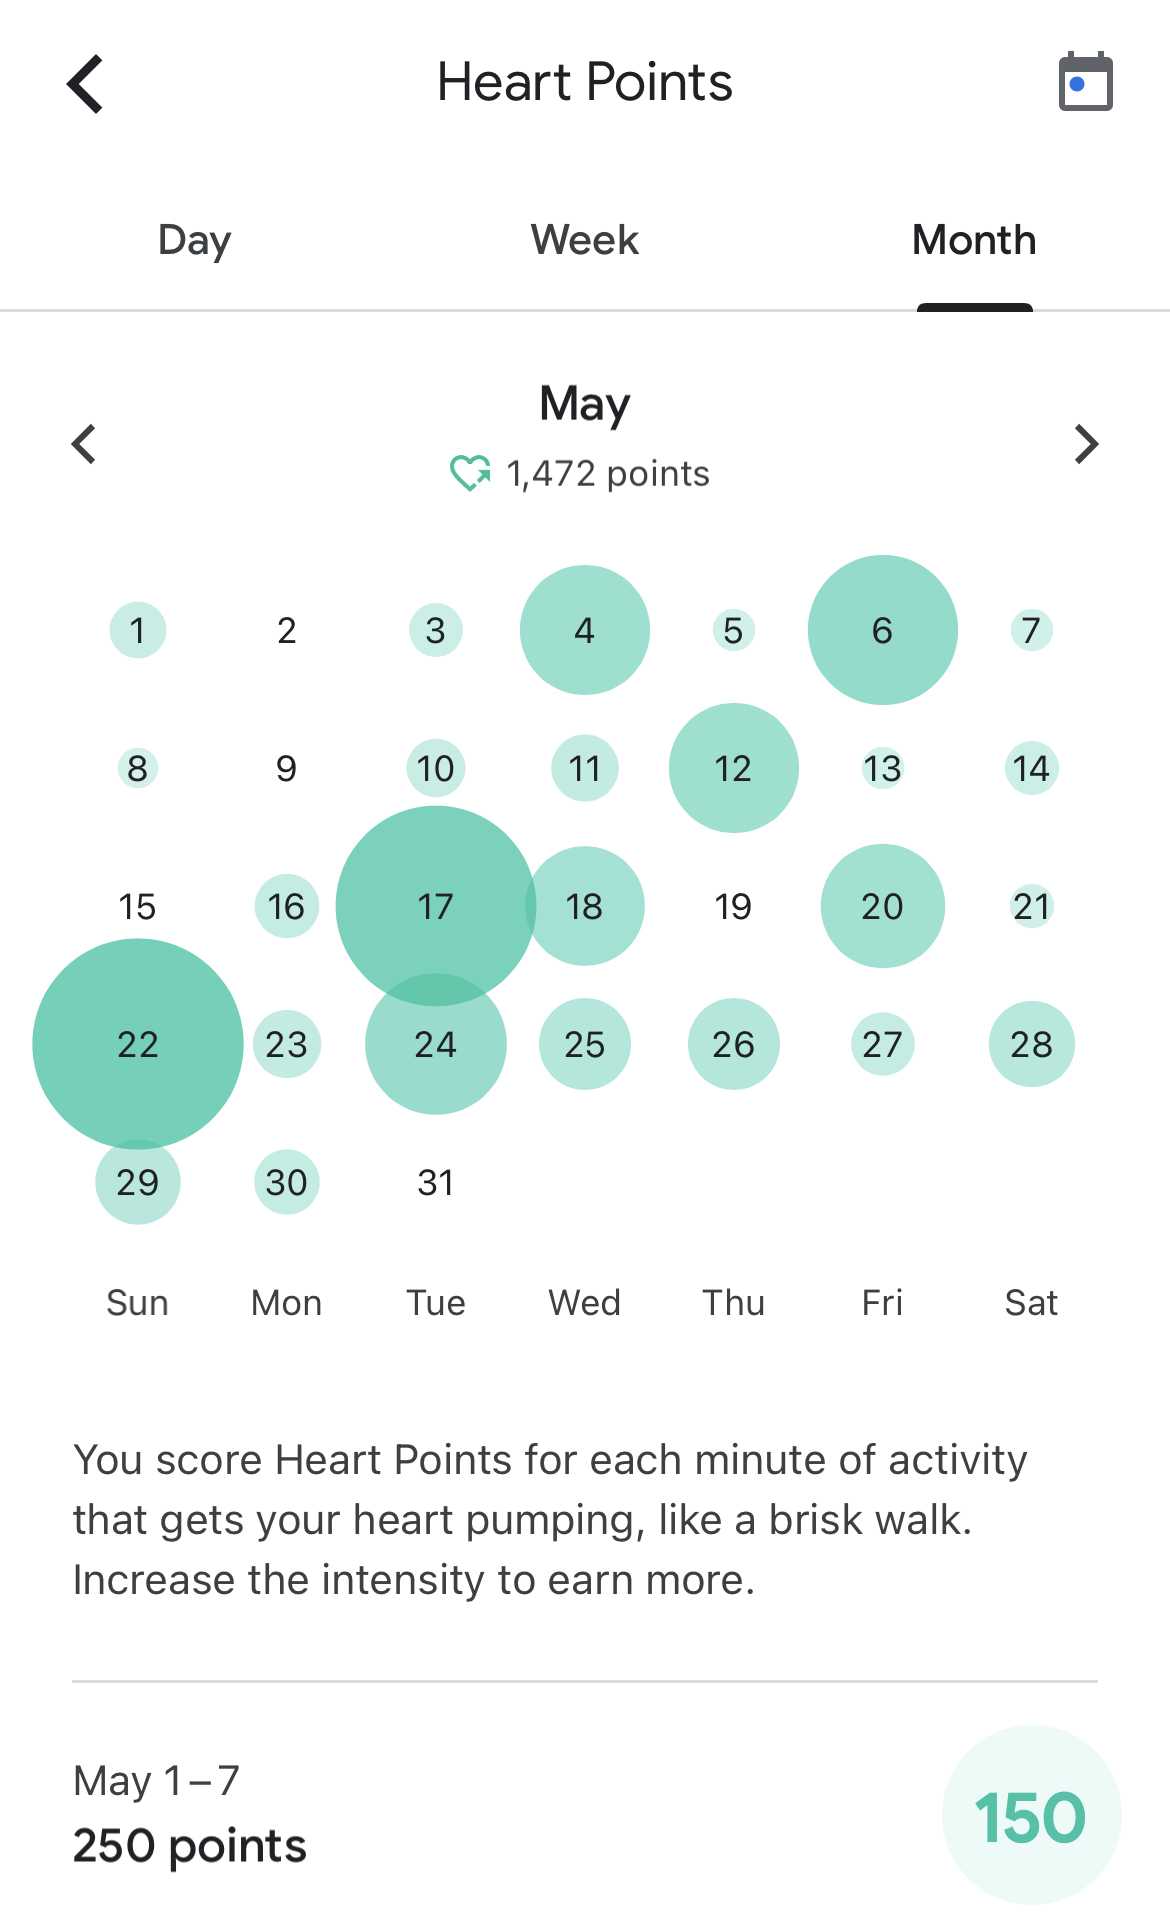 Google Fit, not so fit on counting heart points. - Google Fit Community